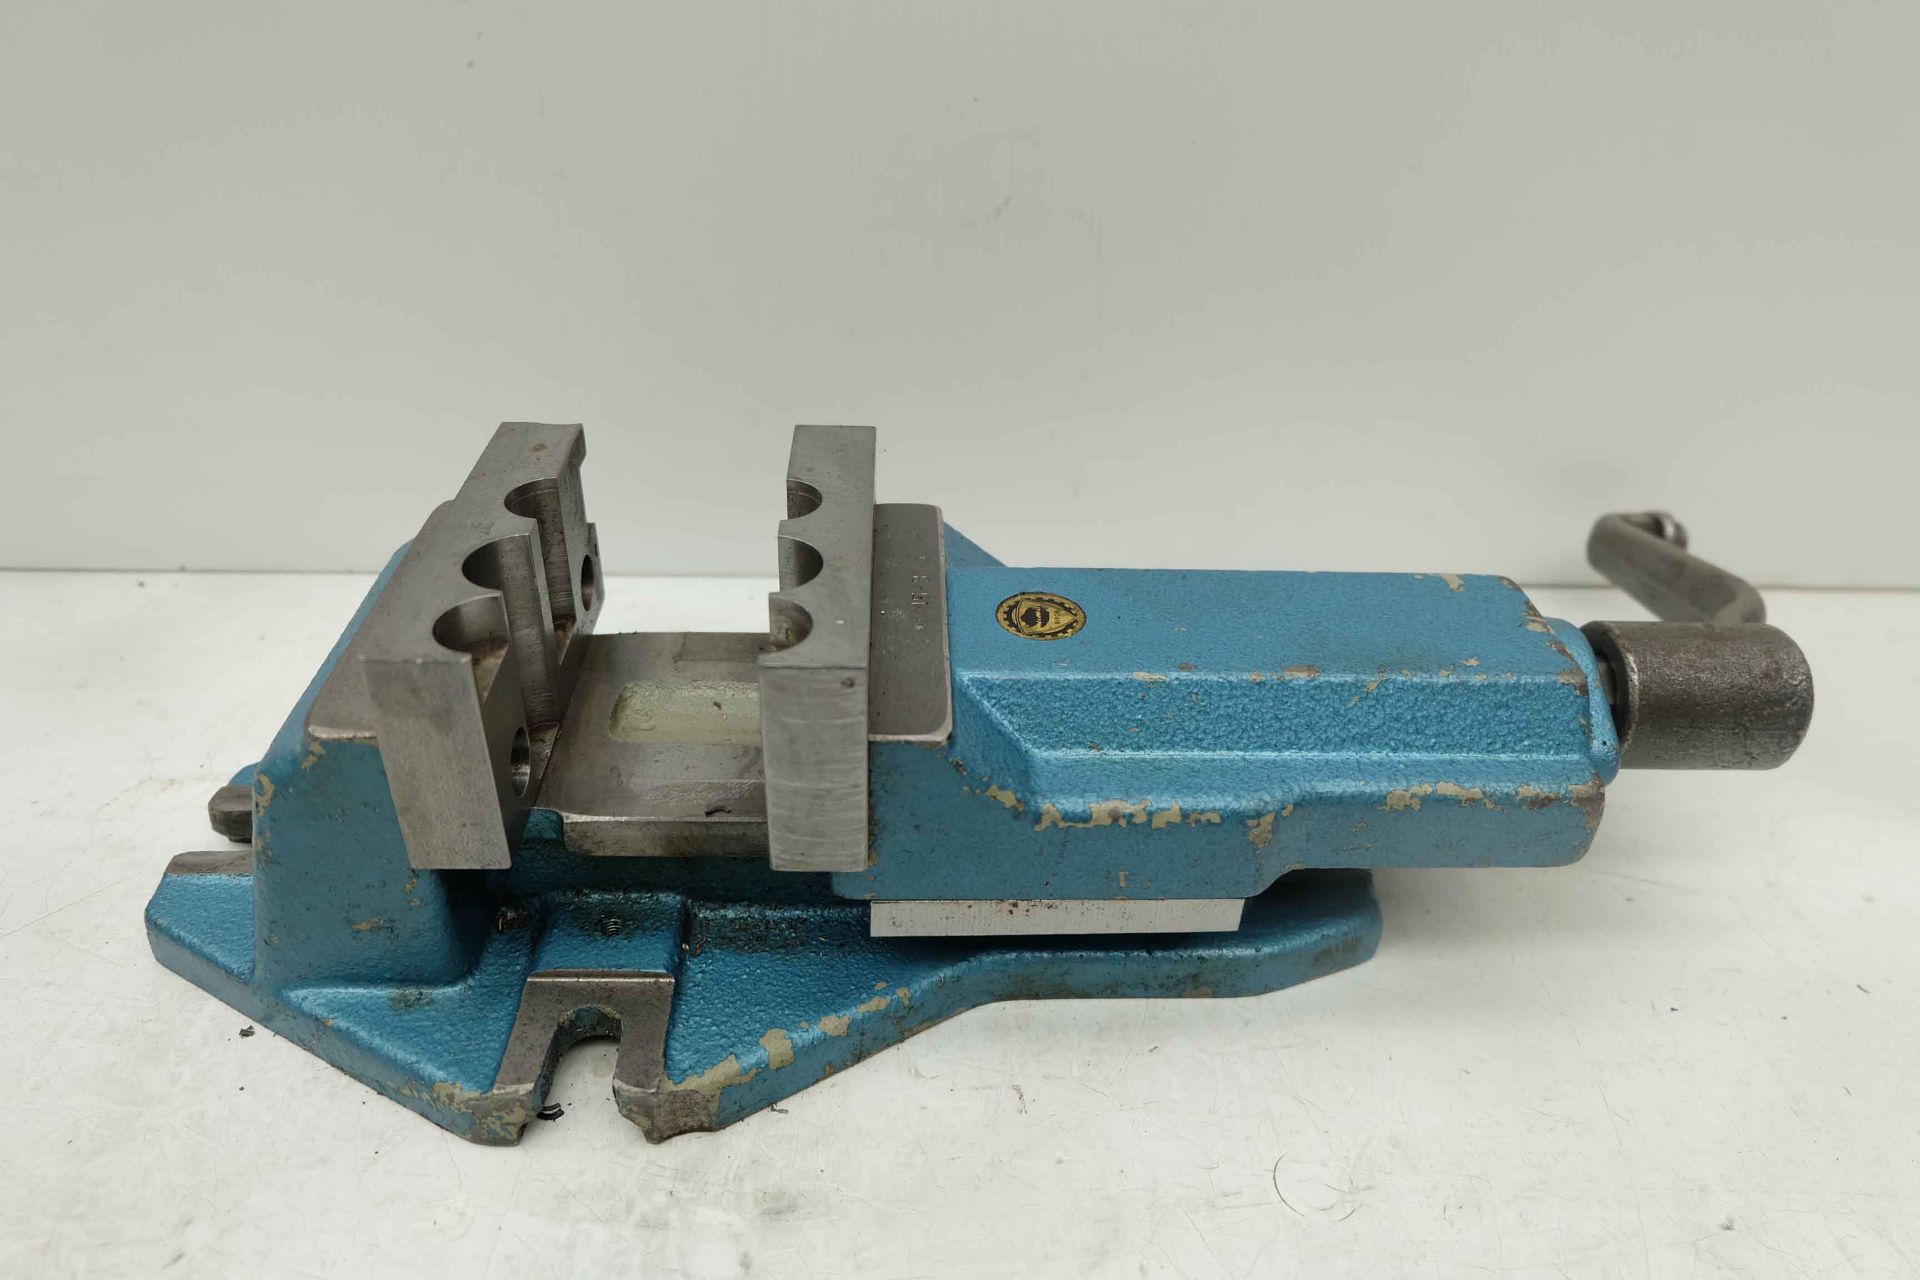 Bison 100mm Machine Vice. Width of Jaws 100mm. Opening of Jaws 100mm.